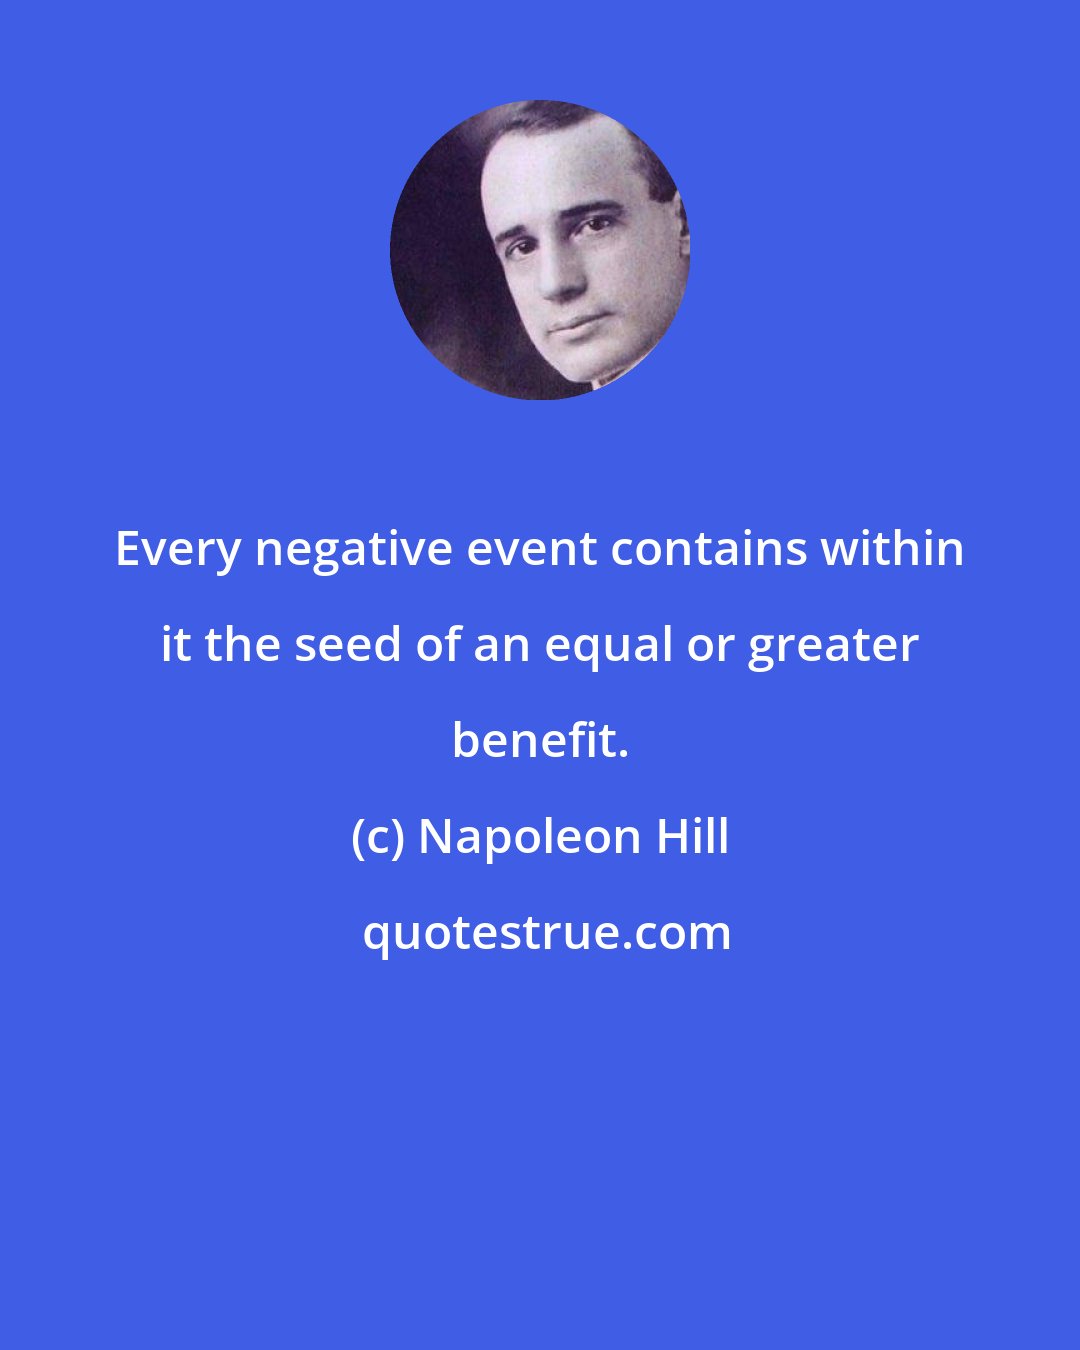 Napoleon Hill: Every negative event contains within it the seed of an equal or greater benefit.